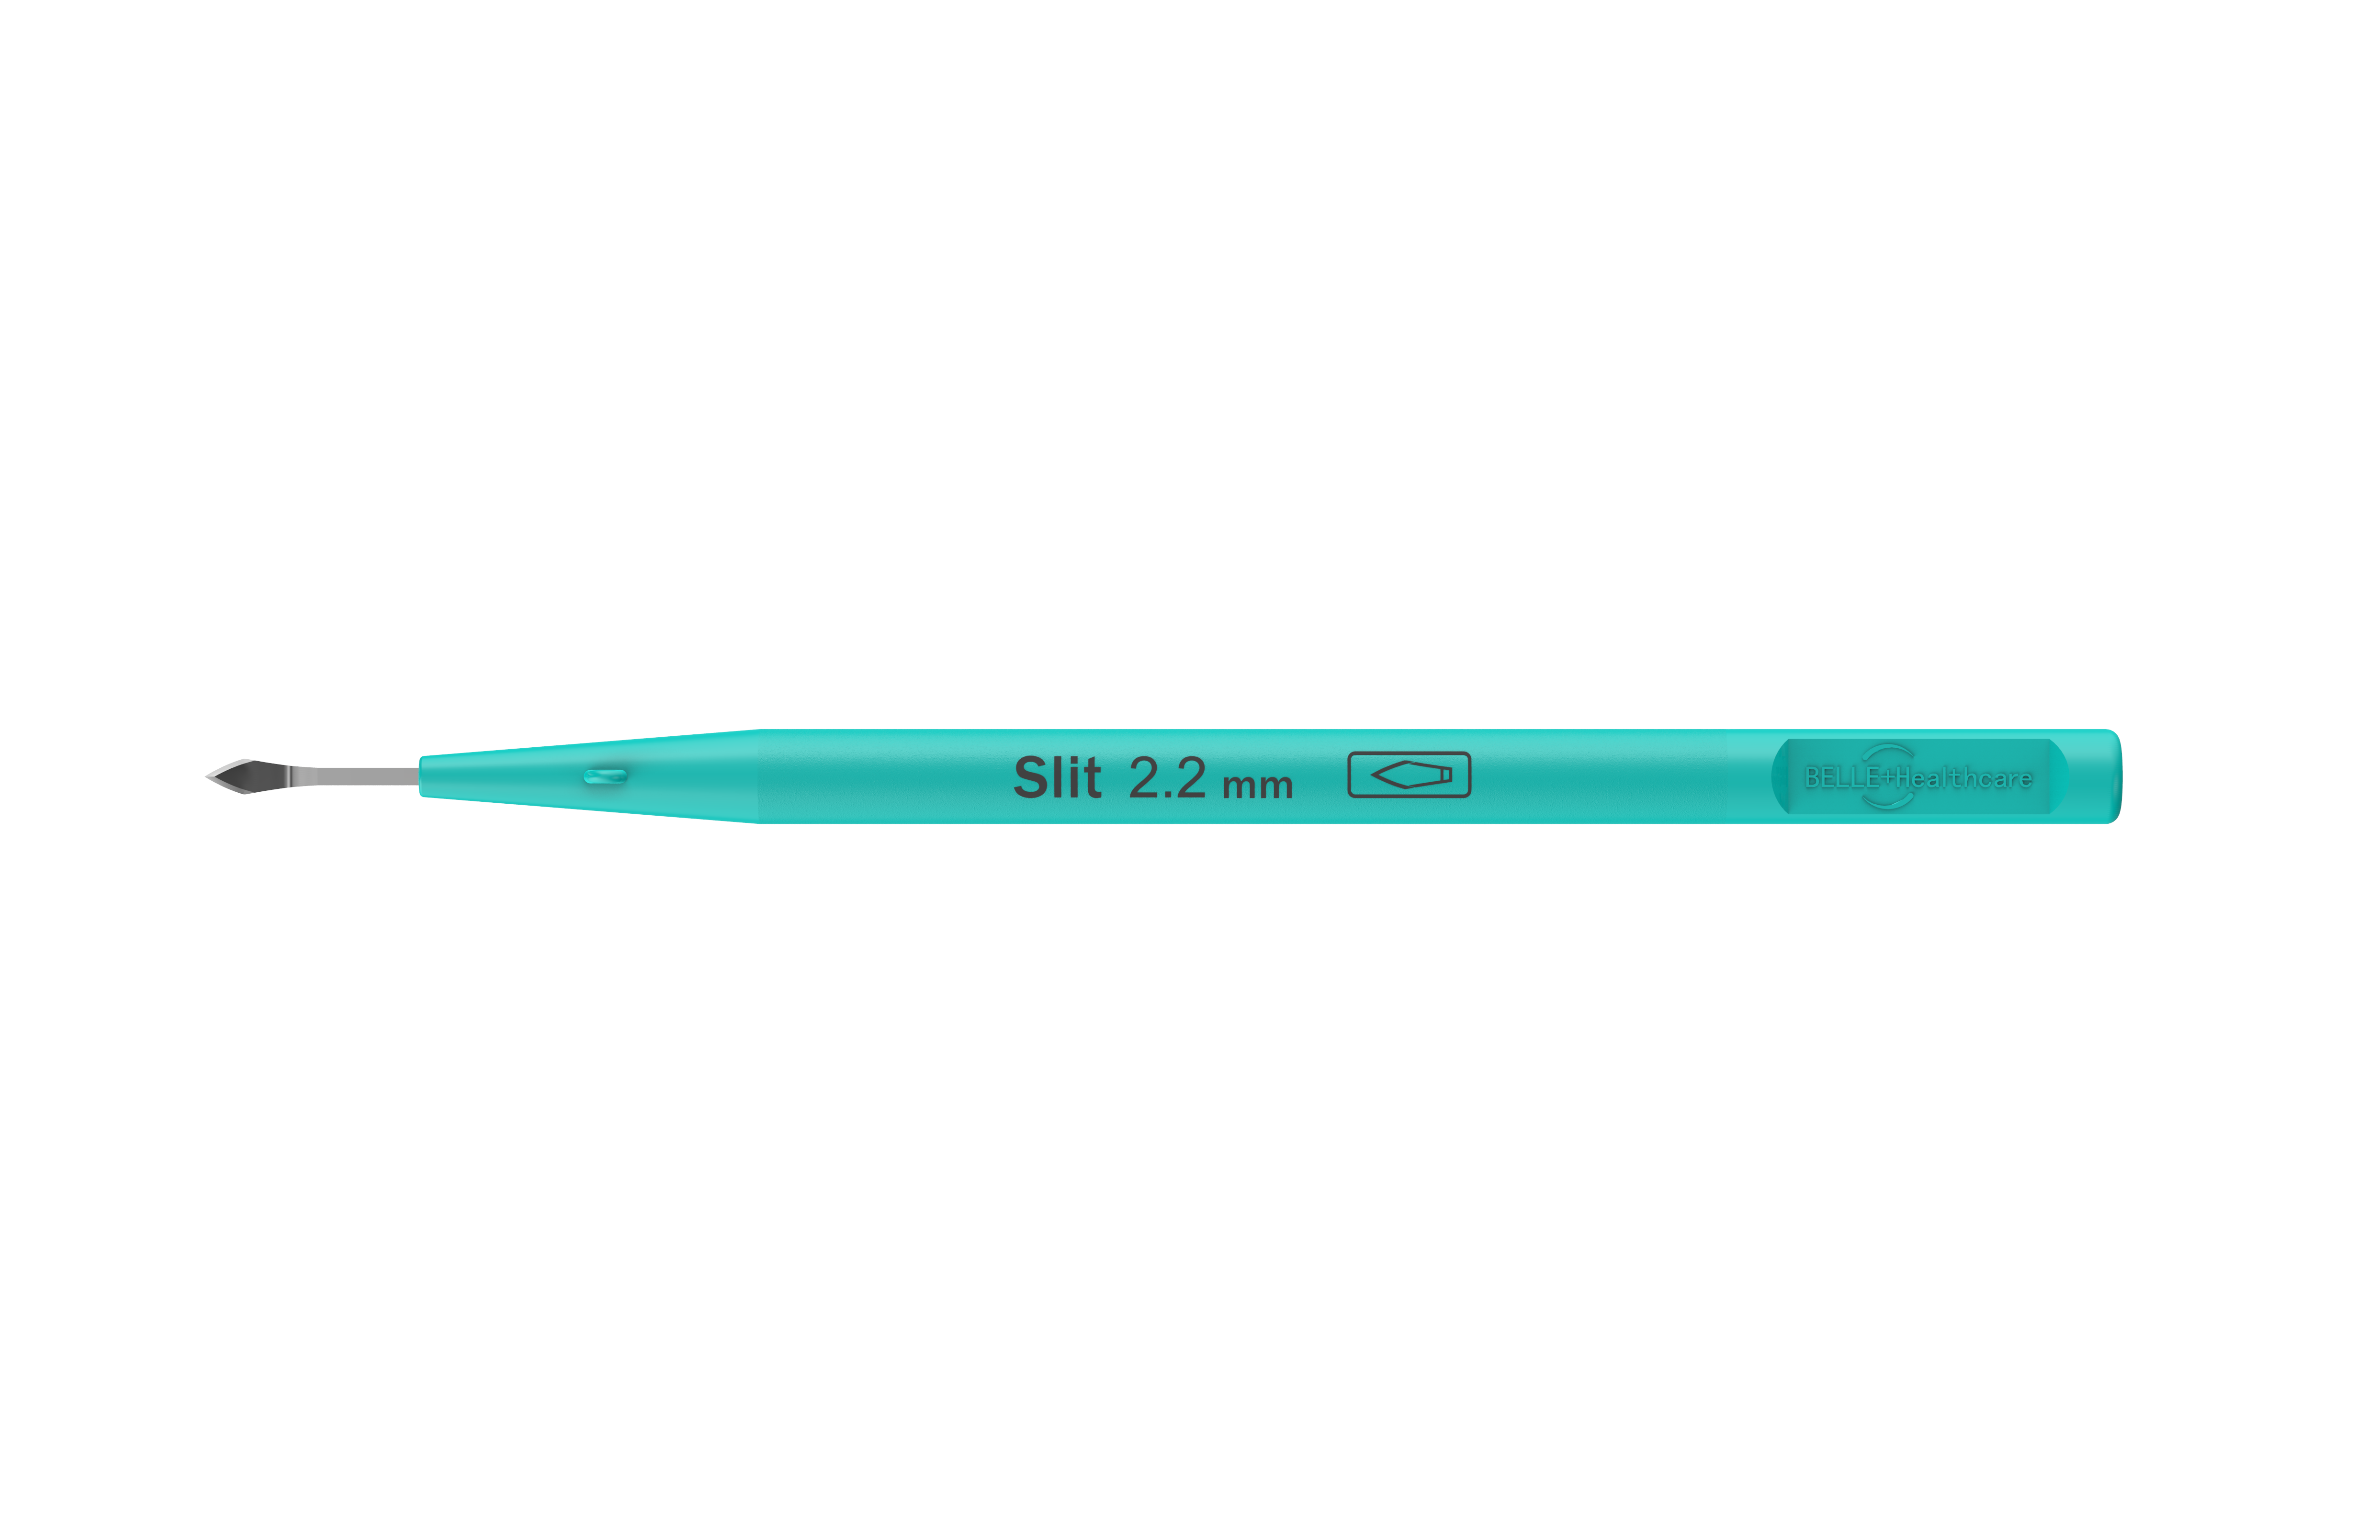 BK-1220B Disposable Ophthalmic Knives